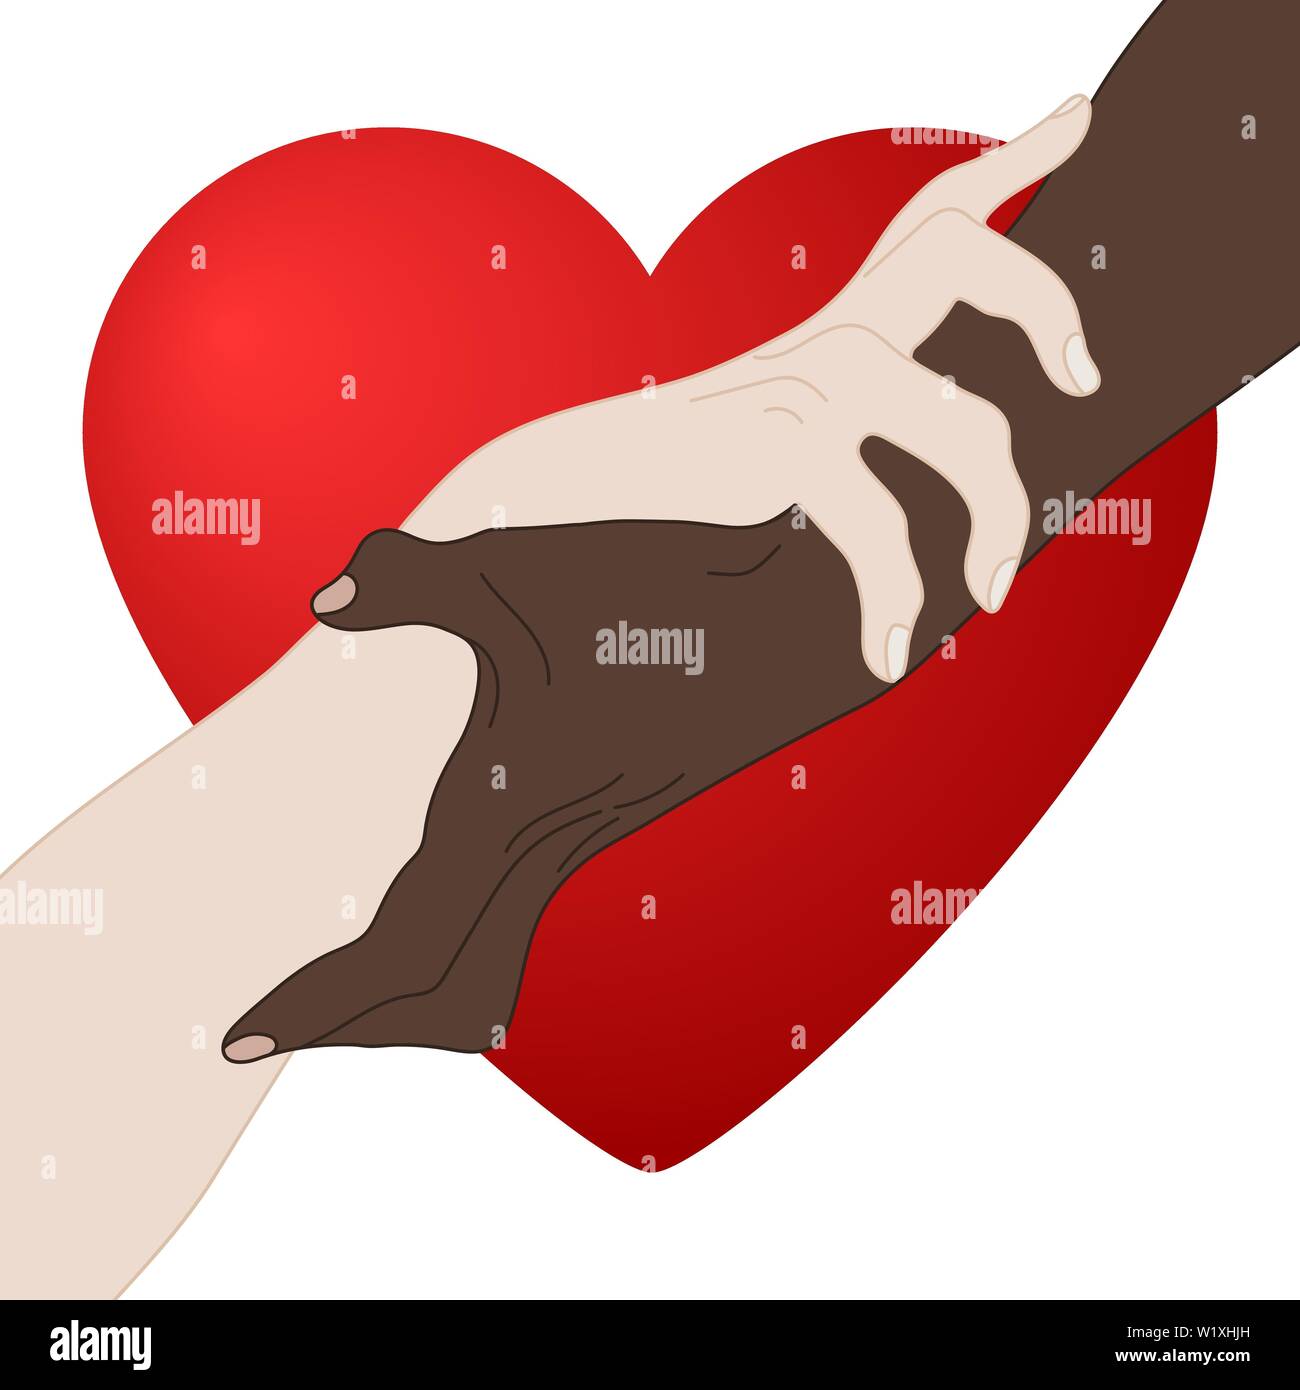 Charity Concept. Giving Love. Holding Hands Showing Unity. Multinational equality. Team, partner, alliance concept. Relationship icon. Vector illustra Stock Vector